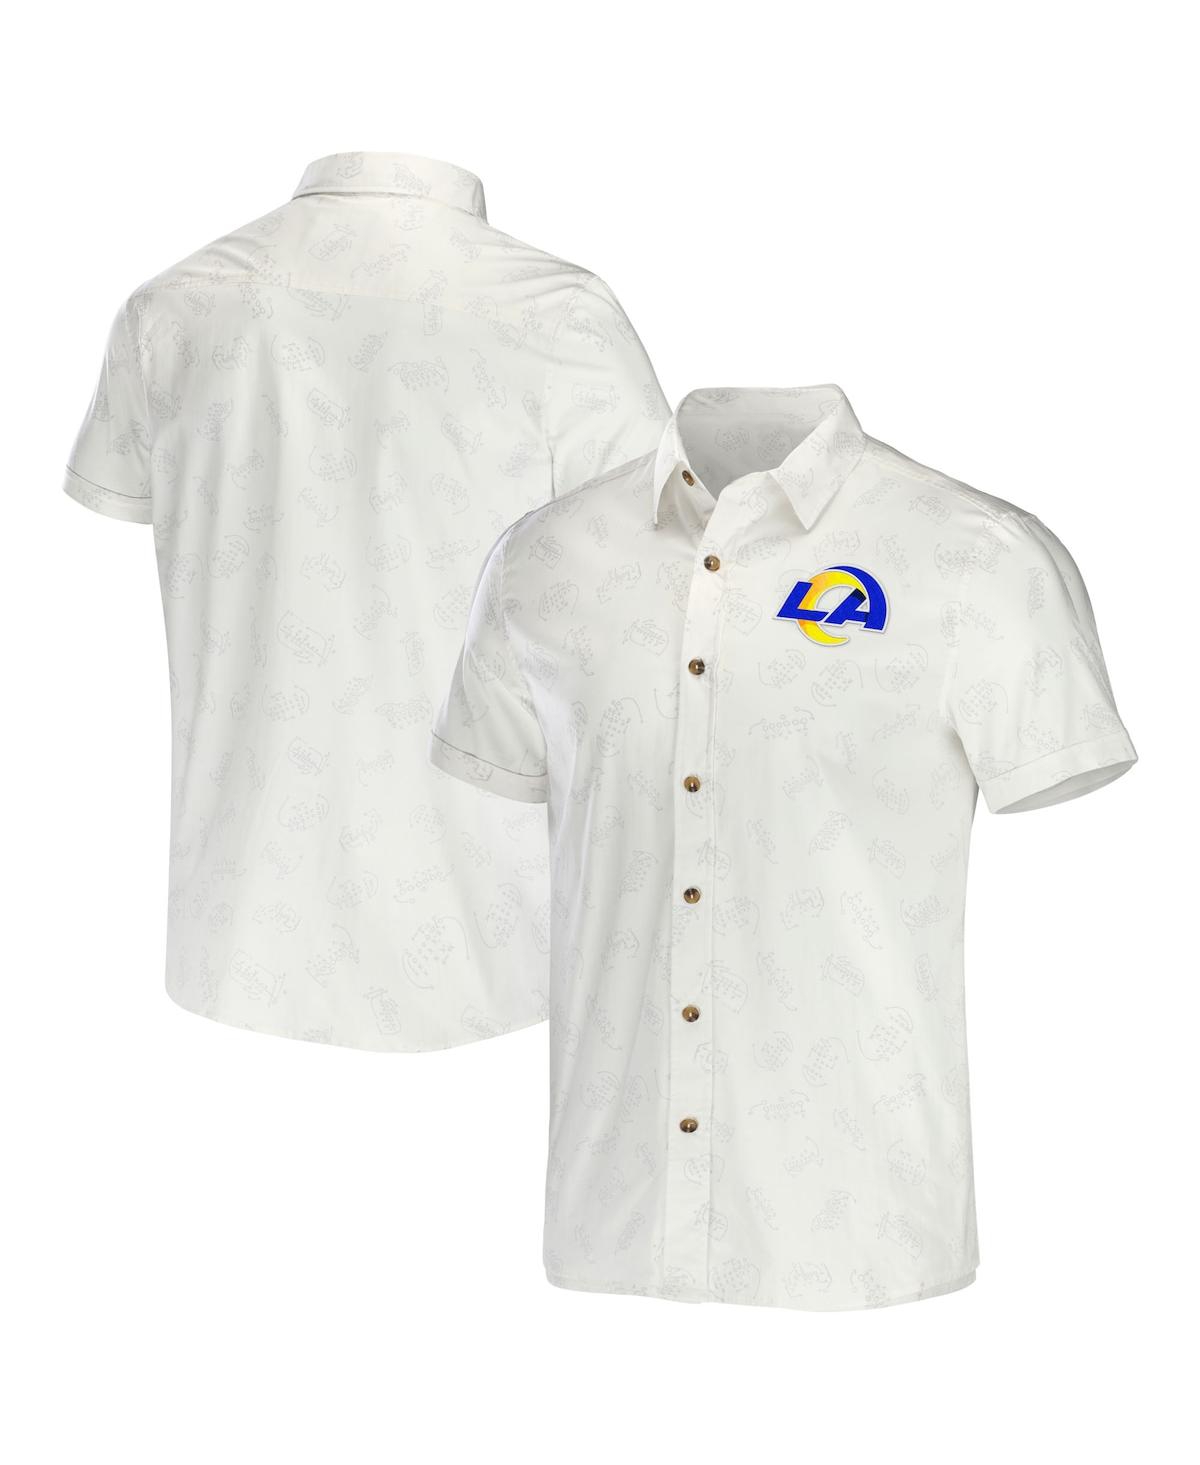 Men's Nfl x Darius Rucker Collection by Fanatics White Los Angeles Rams Woven Button-Up T-shirt - White